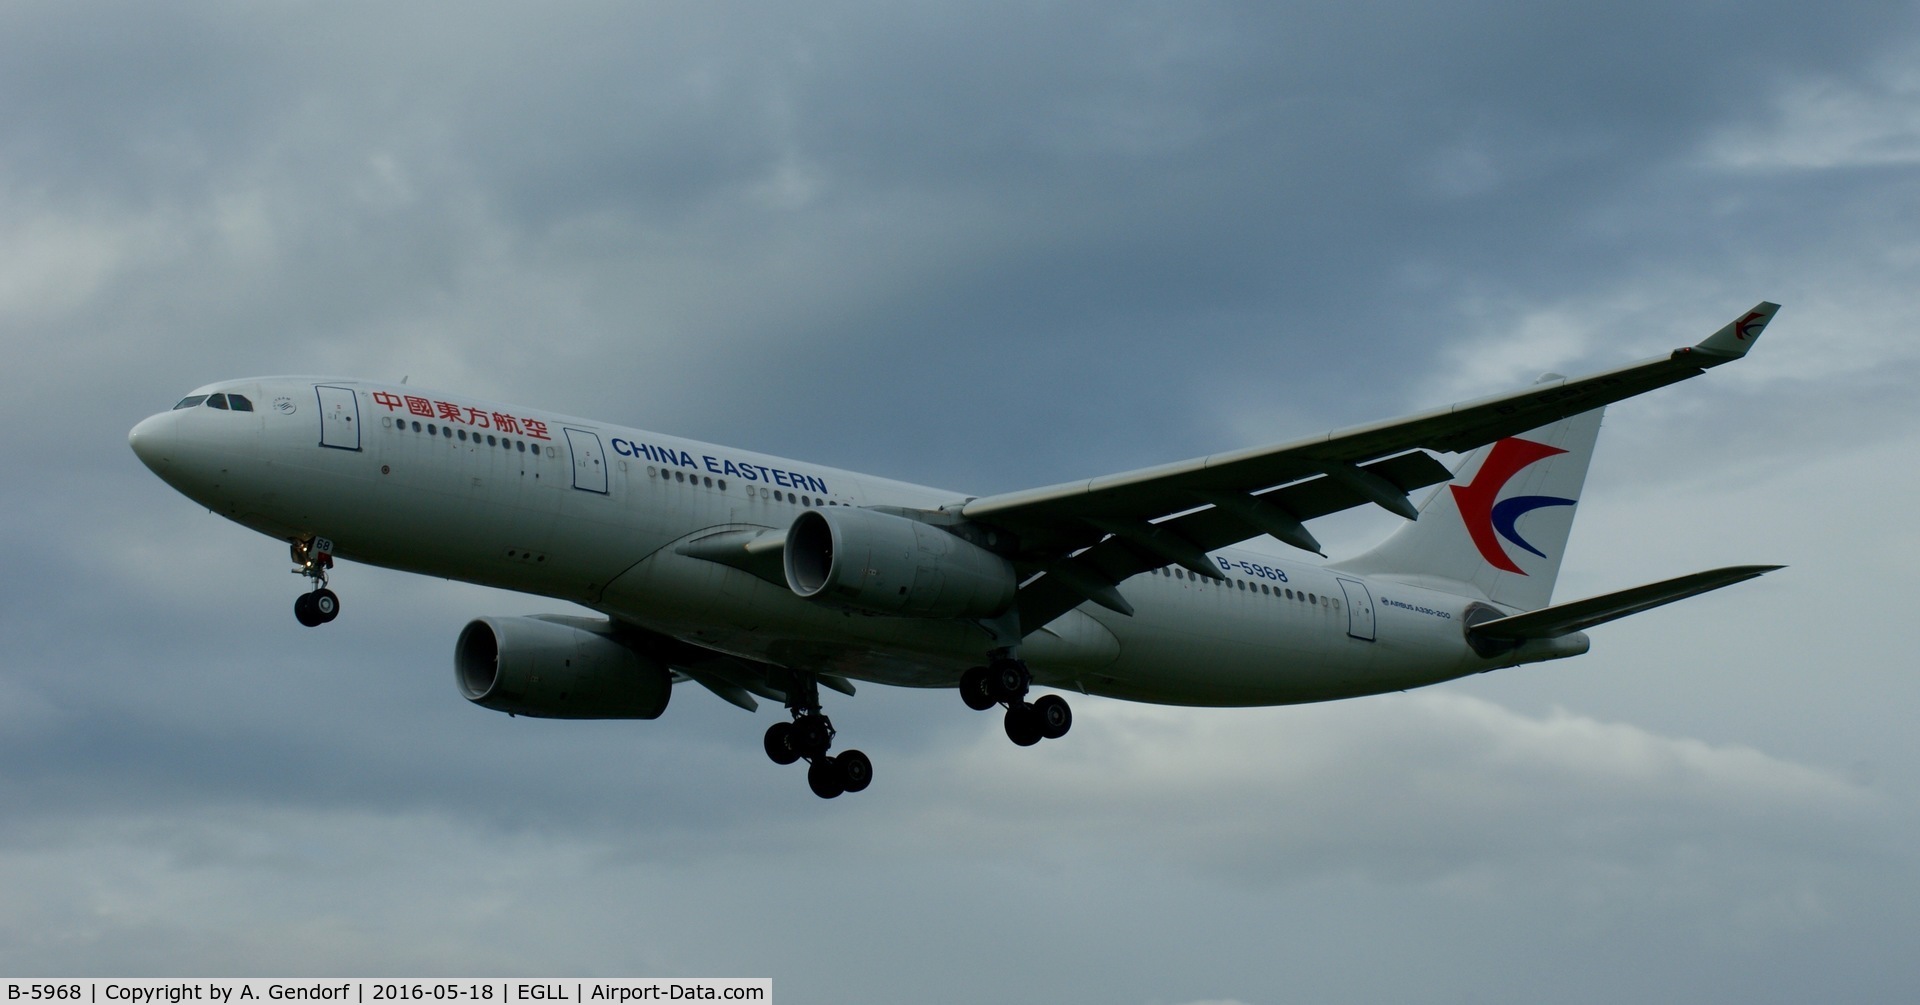 B-5968, 2015 Airbus A330-243 C/N 1603, China Eastern Airlines, seen here landing at London Heathrow(EGLL)